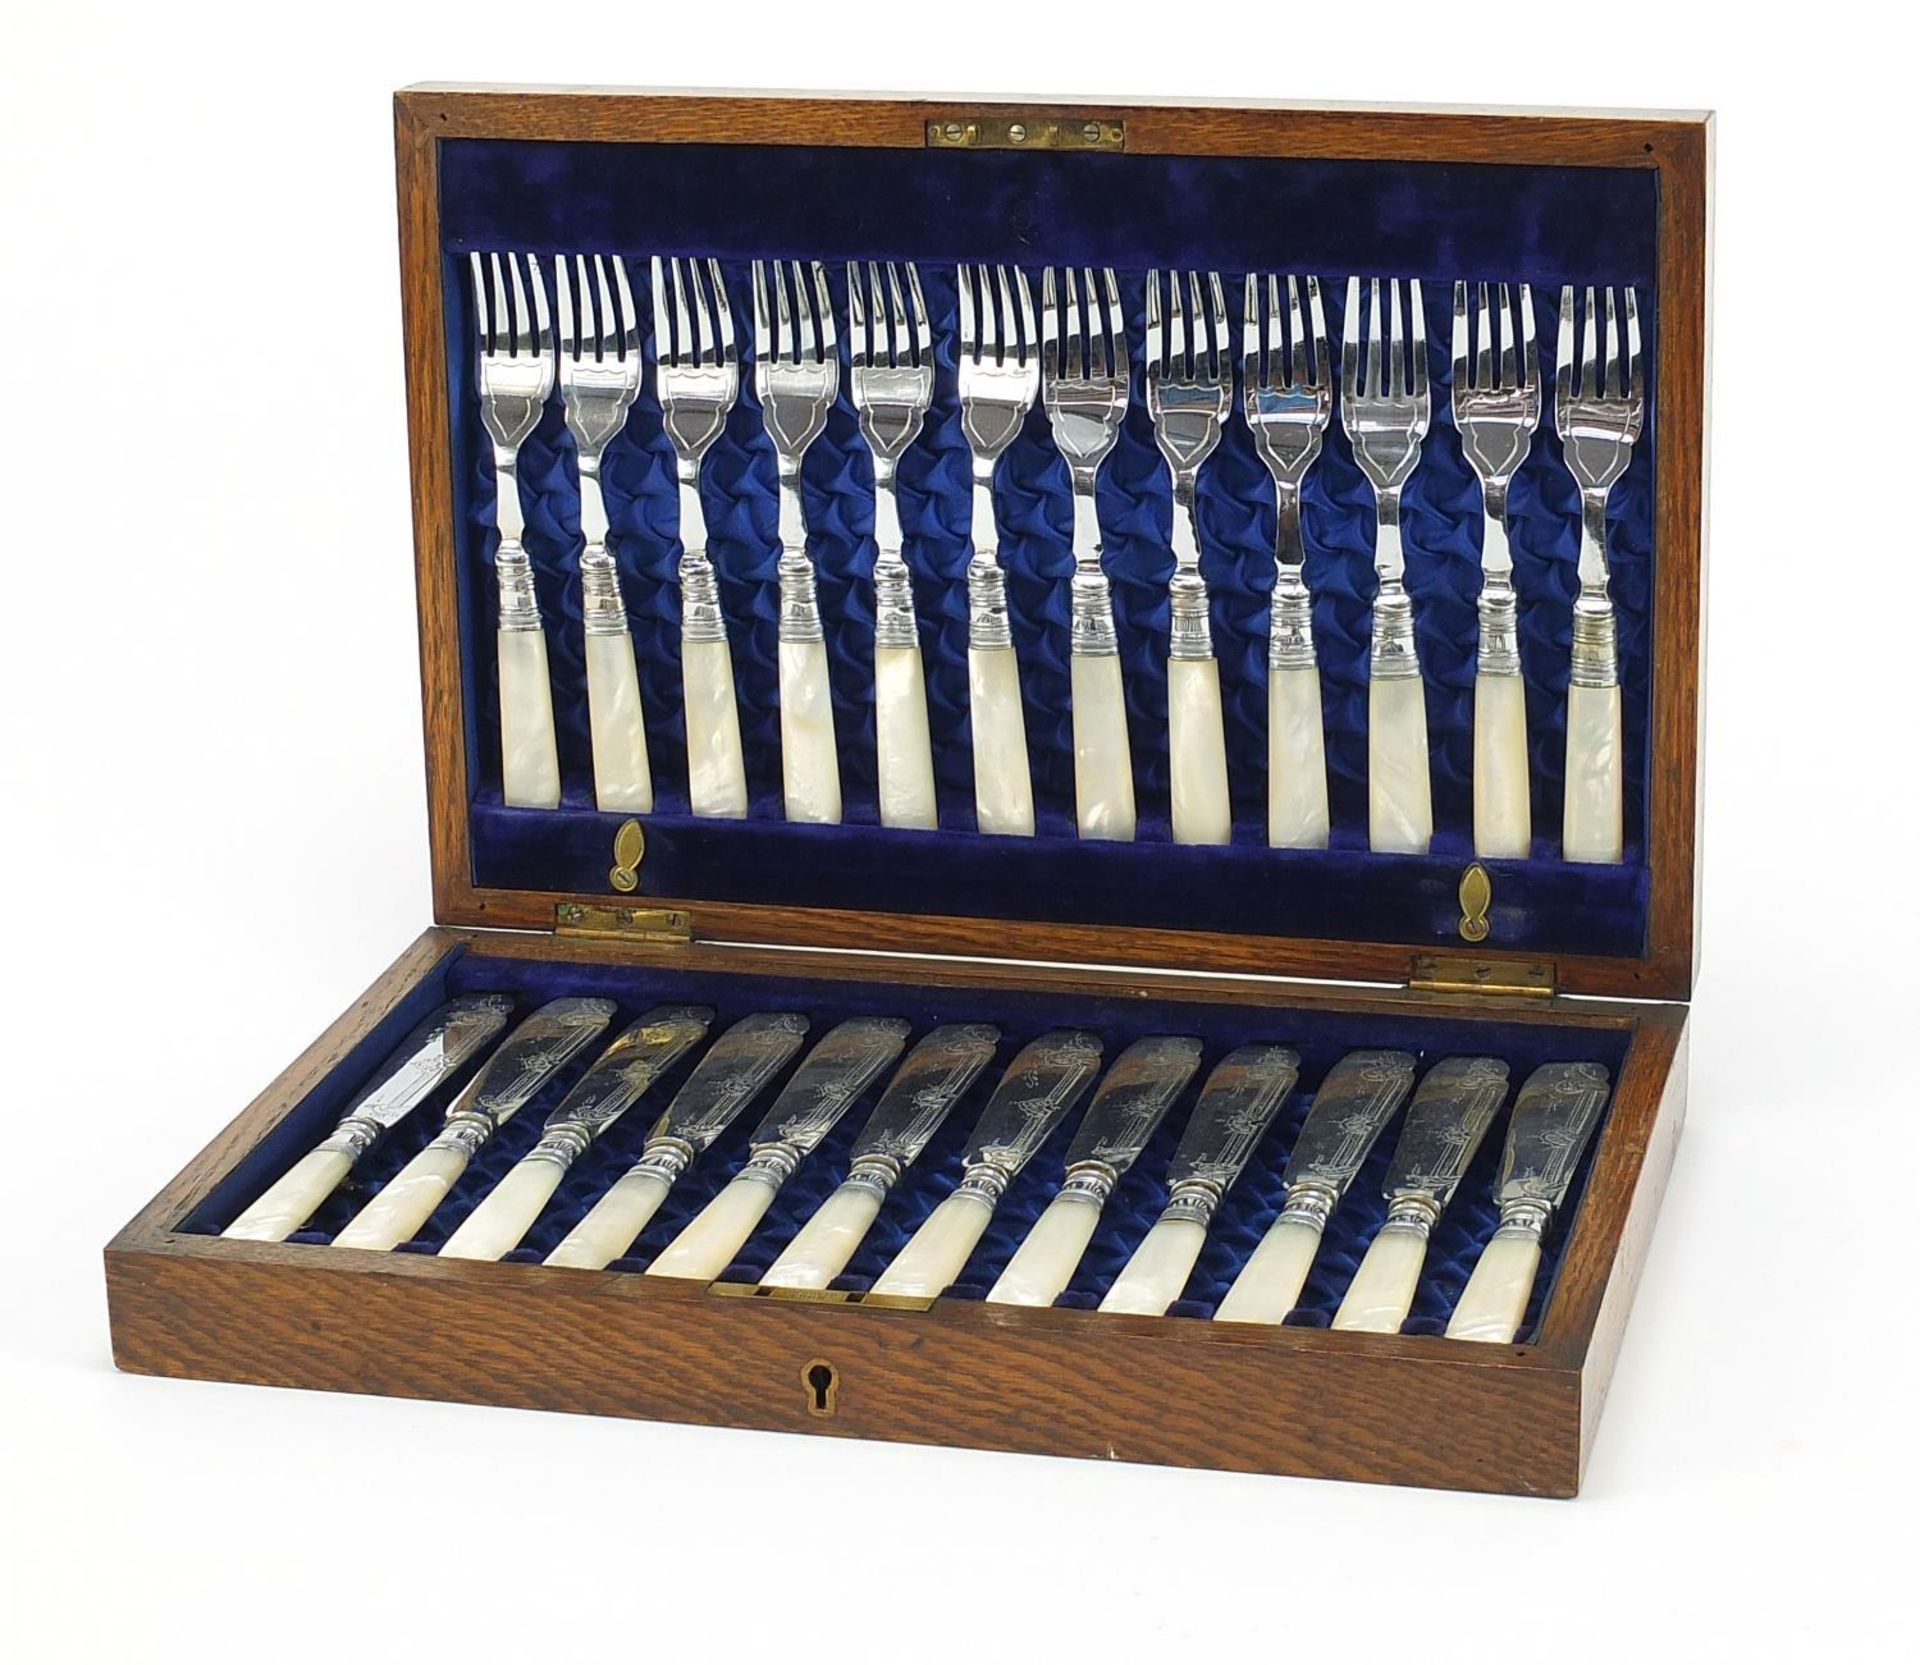 Oak twelve place canteen of silver plated fish knives and forks with mother of pearl handles, the